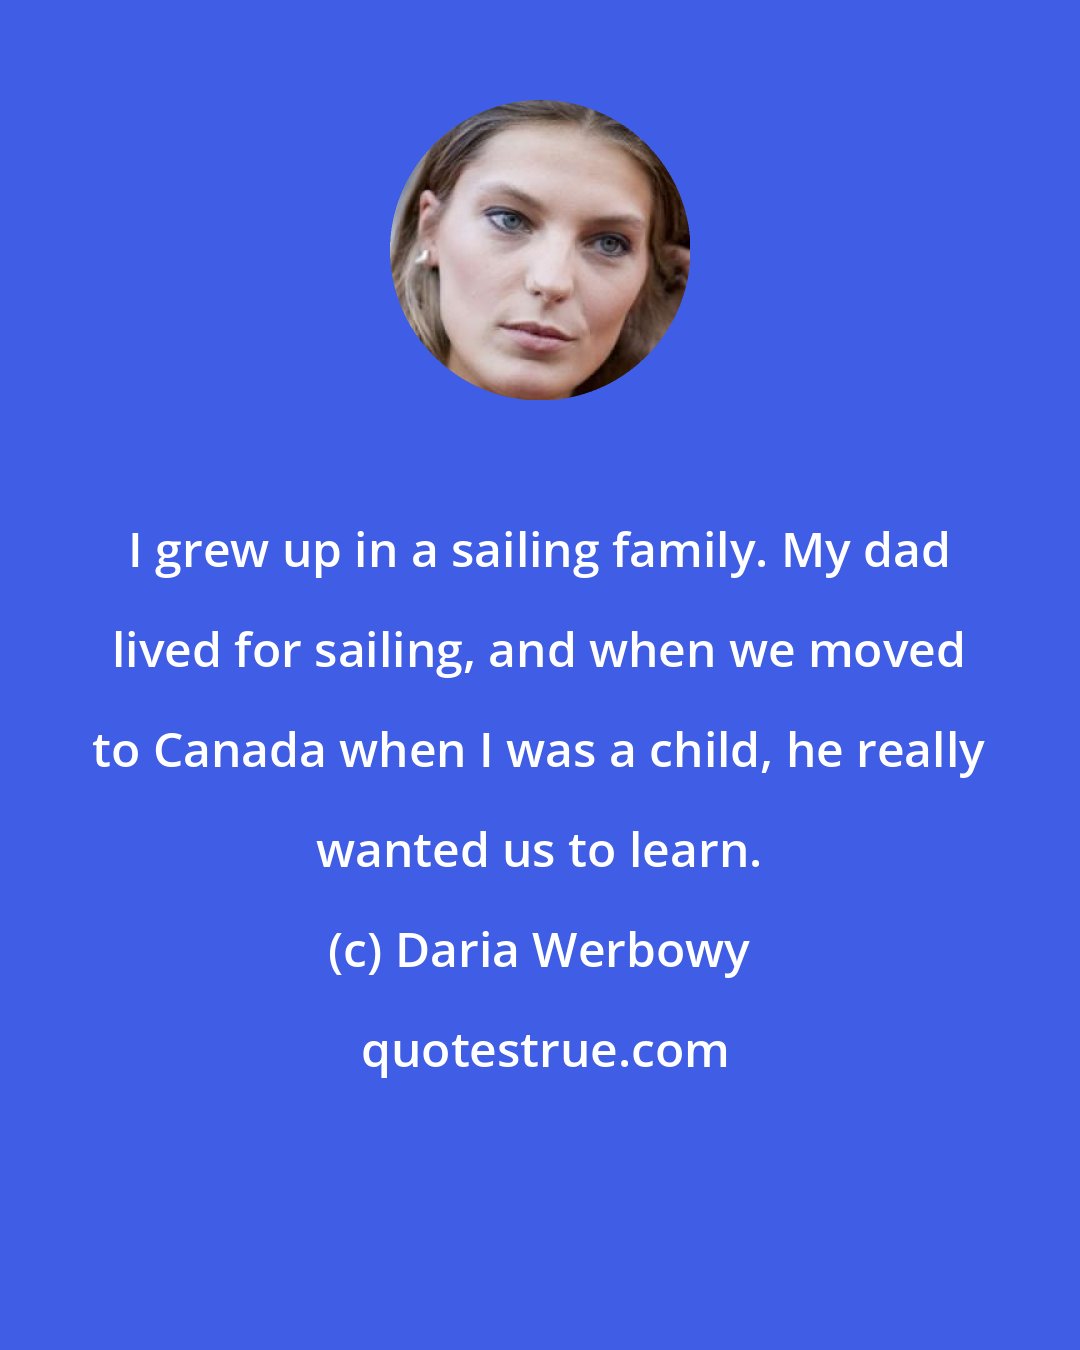 Daria Werbowy: I grew up in a sailing family. My dad lived for sailing, and when we moved to Canada when I was a child, he really wanted us to learn.